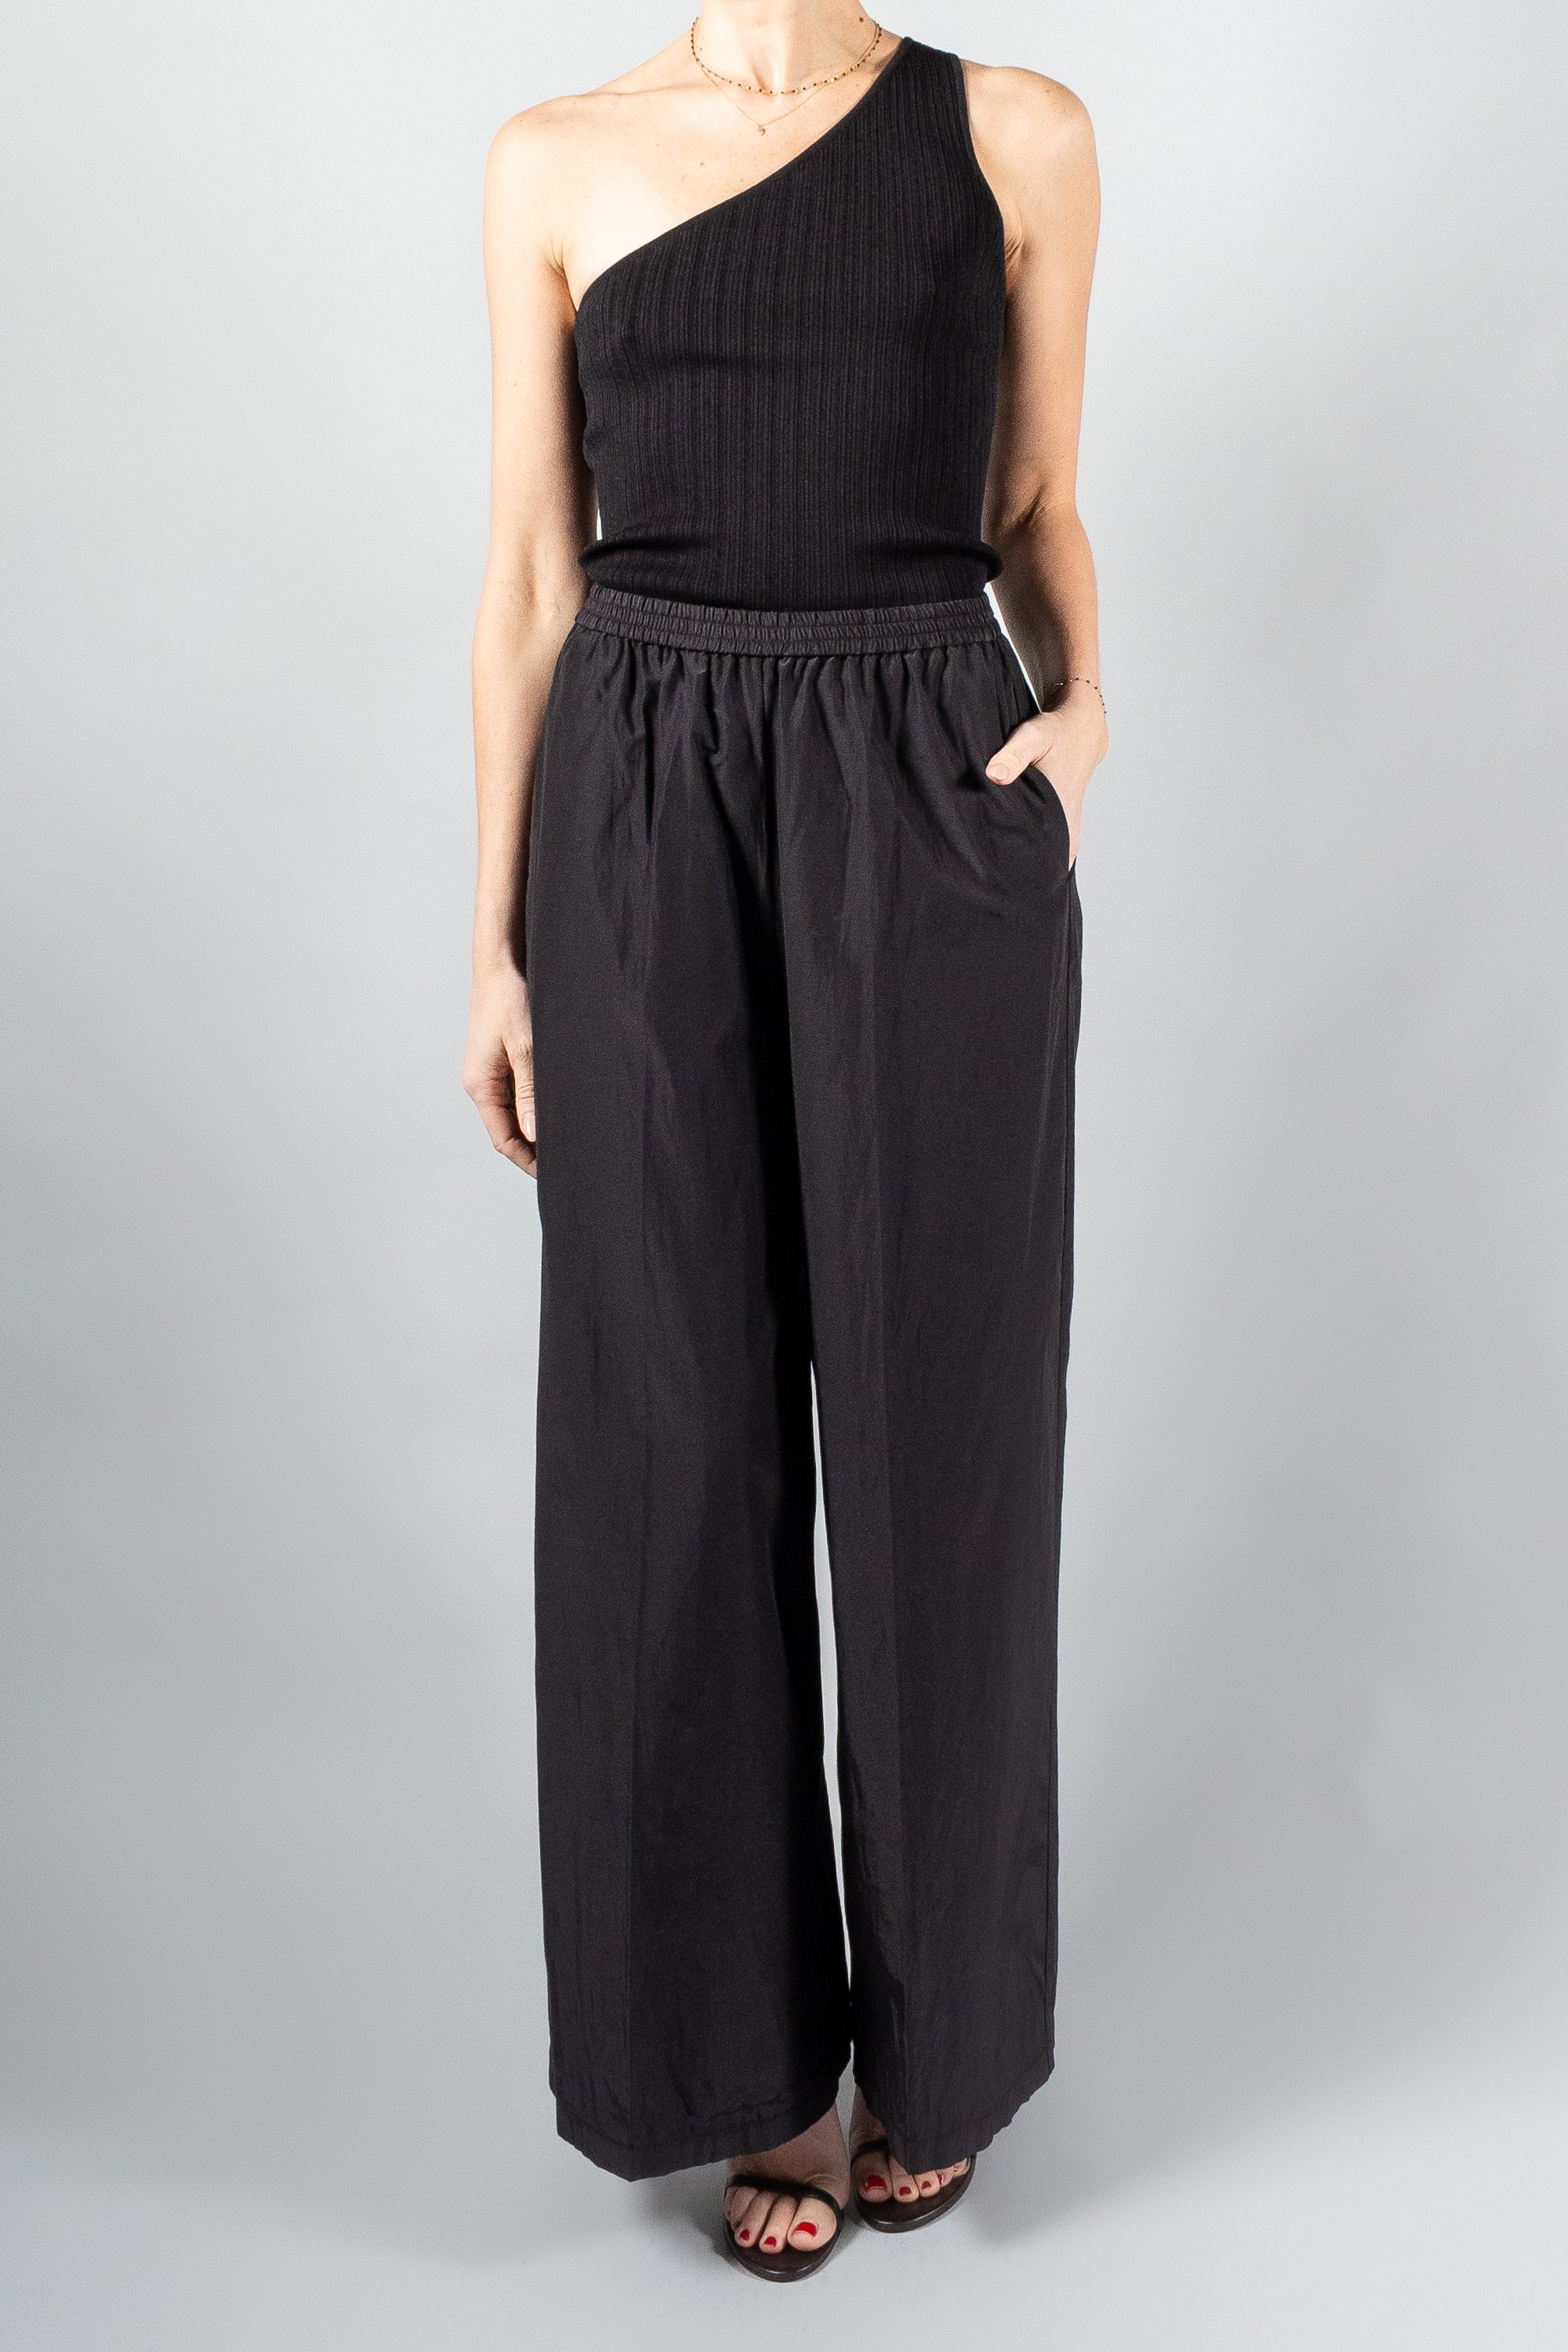 Forte Forte Chic Taffettas Palazzo Pants-Pants and Shorts-Misch-Boutique-Vancouver-Canada-misch.ca